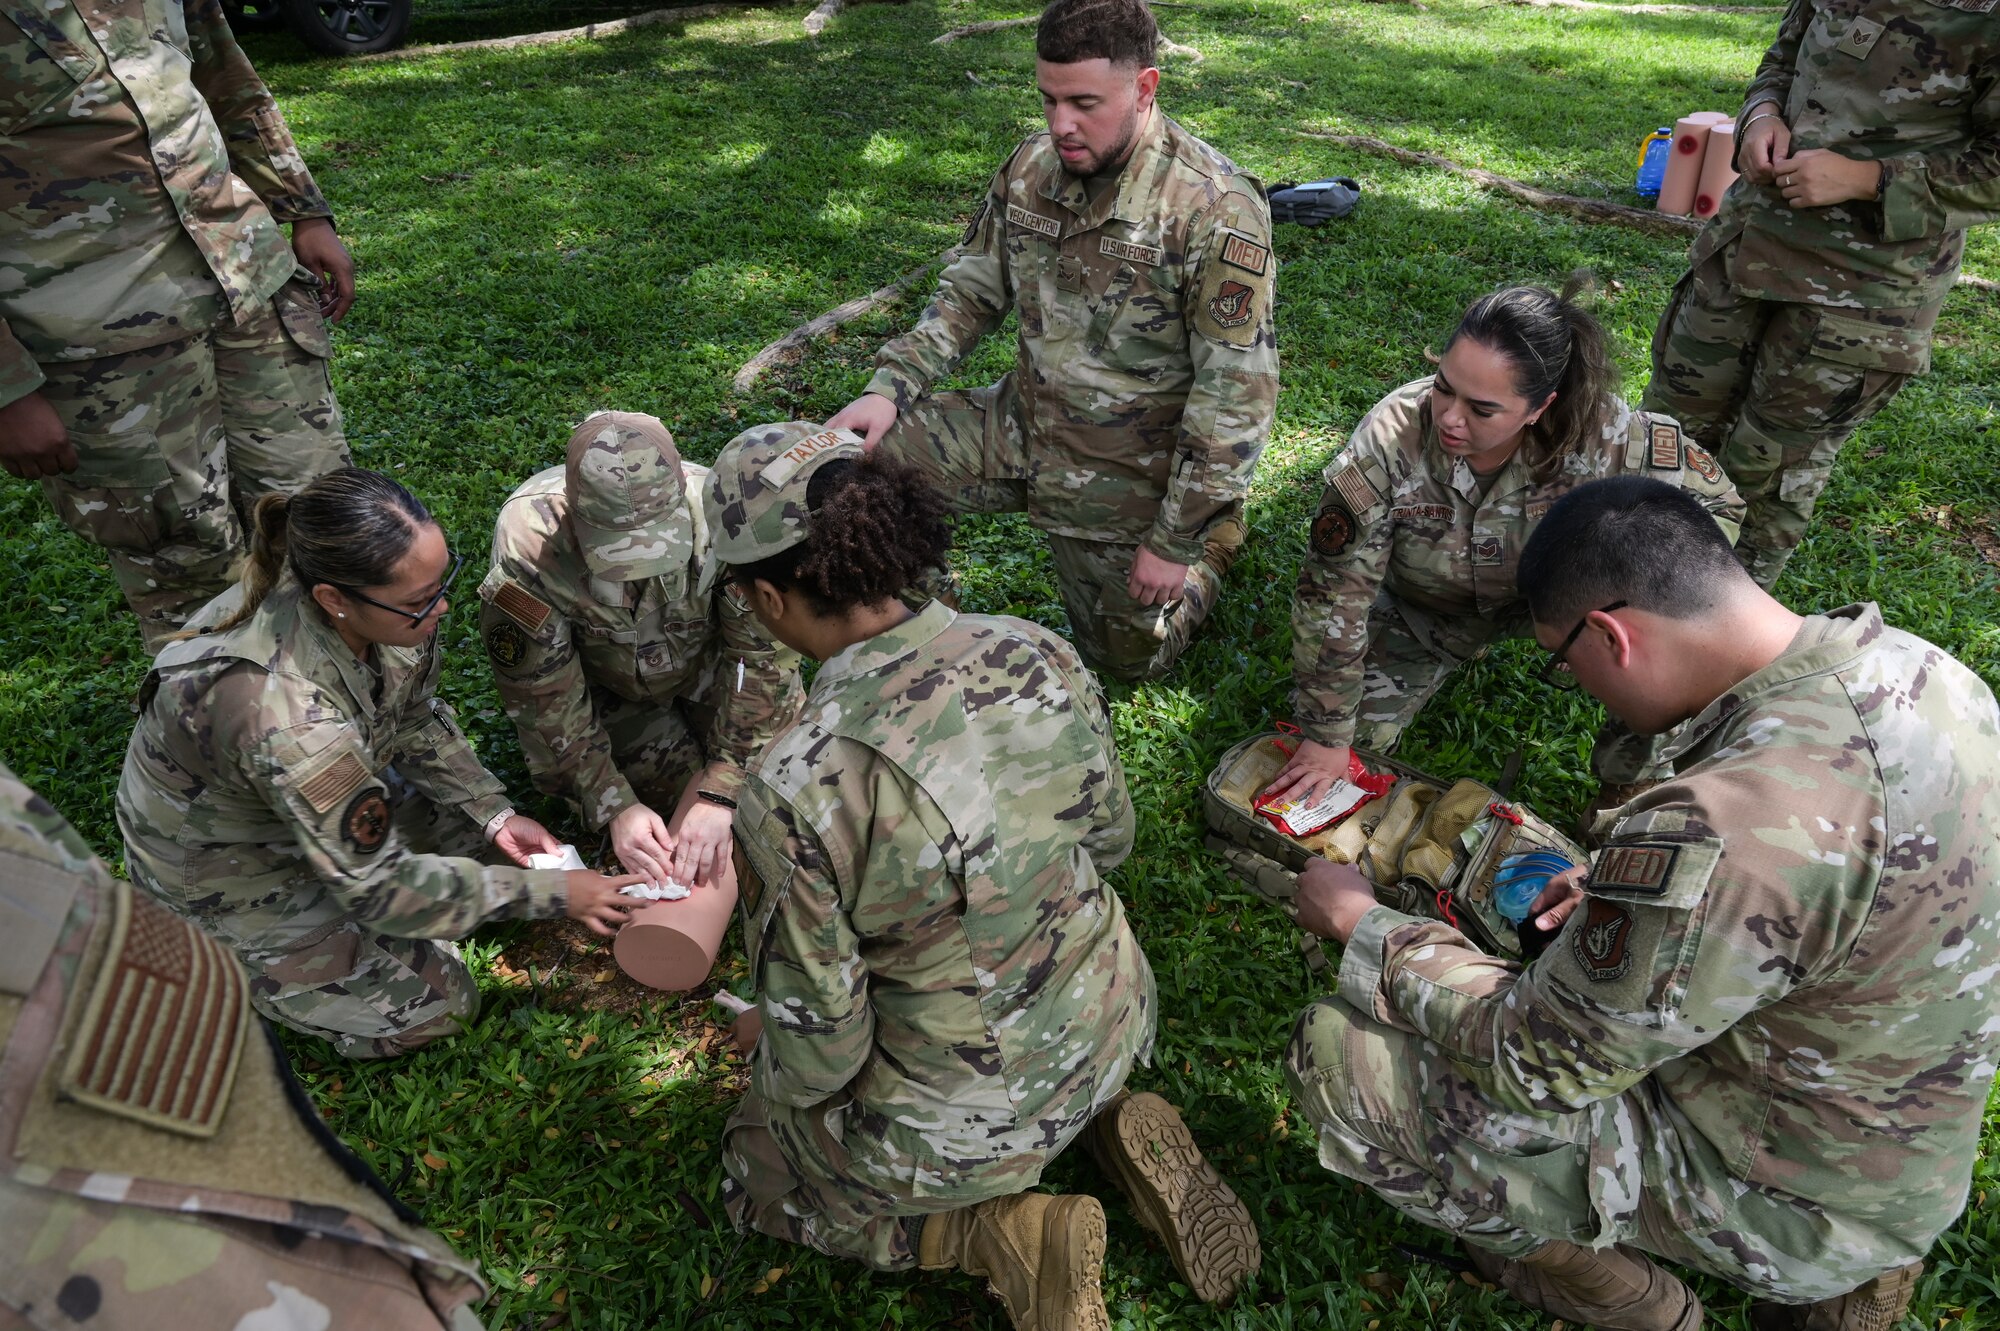 Airmen assigned to the 15th Medical Group pack a simulated wound during a Tactical Combat Casualty Care and Ability to Survive and Operate relay at Joint Base Pearl Harbor-Hickam, Hawaii, April 17, 2024. Eight teams participated in the relay, racing to see which team could accomplish each TCCC station correctly in a short time. (U.S. Air Force photo by Staff Sgt. Alan Ricker)